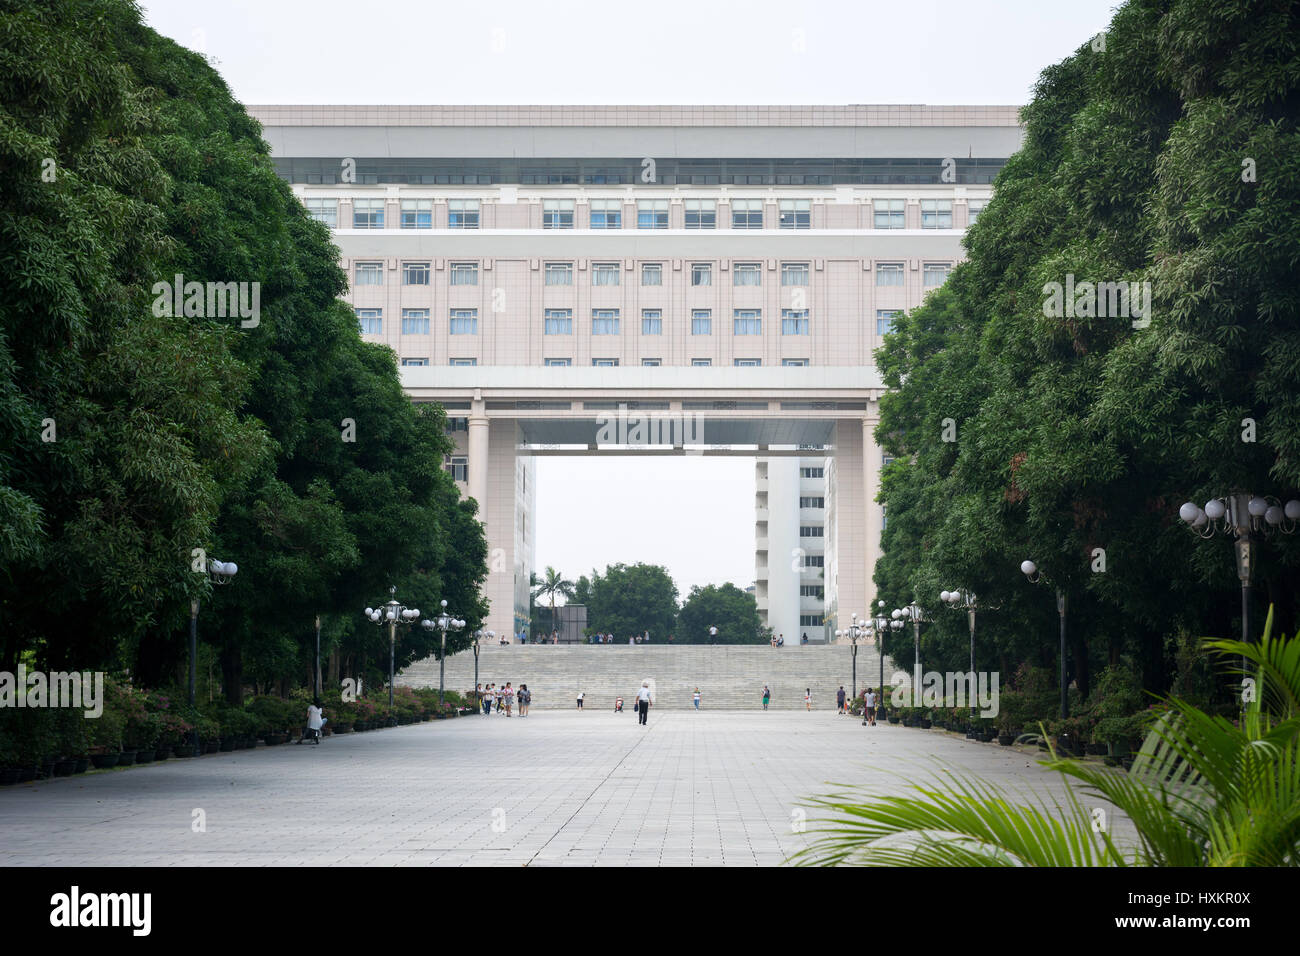 NANNING, CHINA - SEPTEMBER 20, 2016: Guangxi university building entrance with students walking on a sunny day Stock Photo